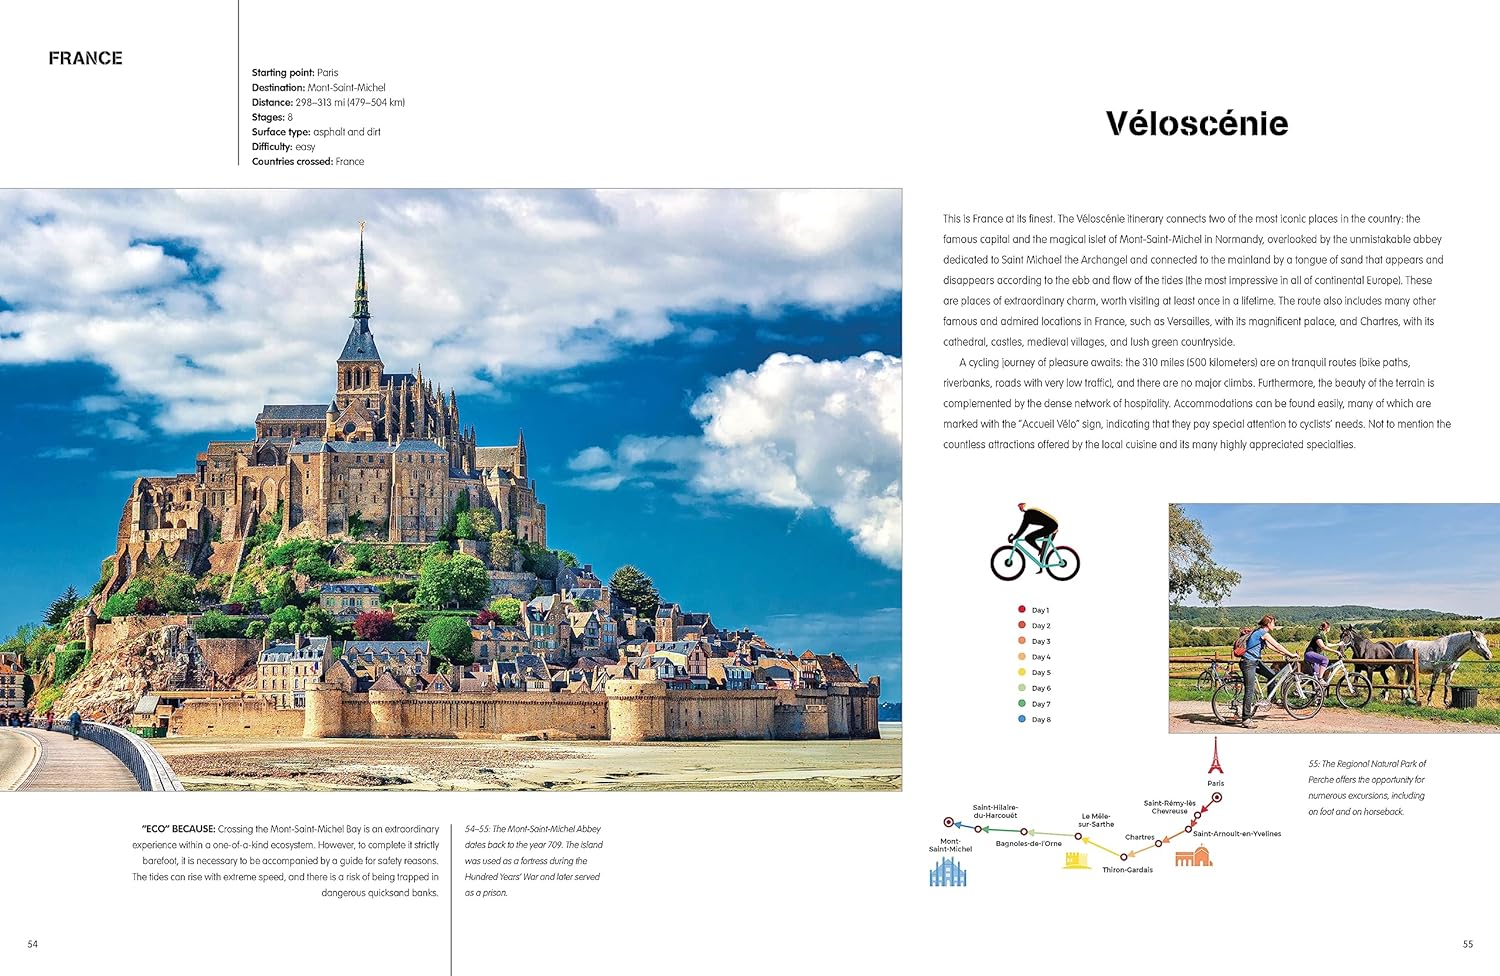 Let's Bike - The Best European Routes on Two Wheels